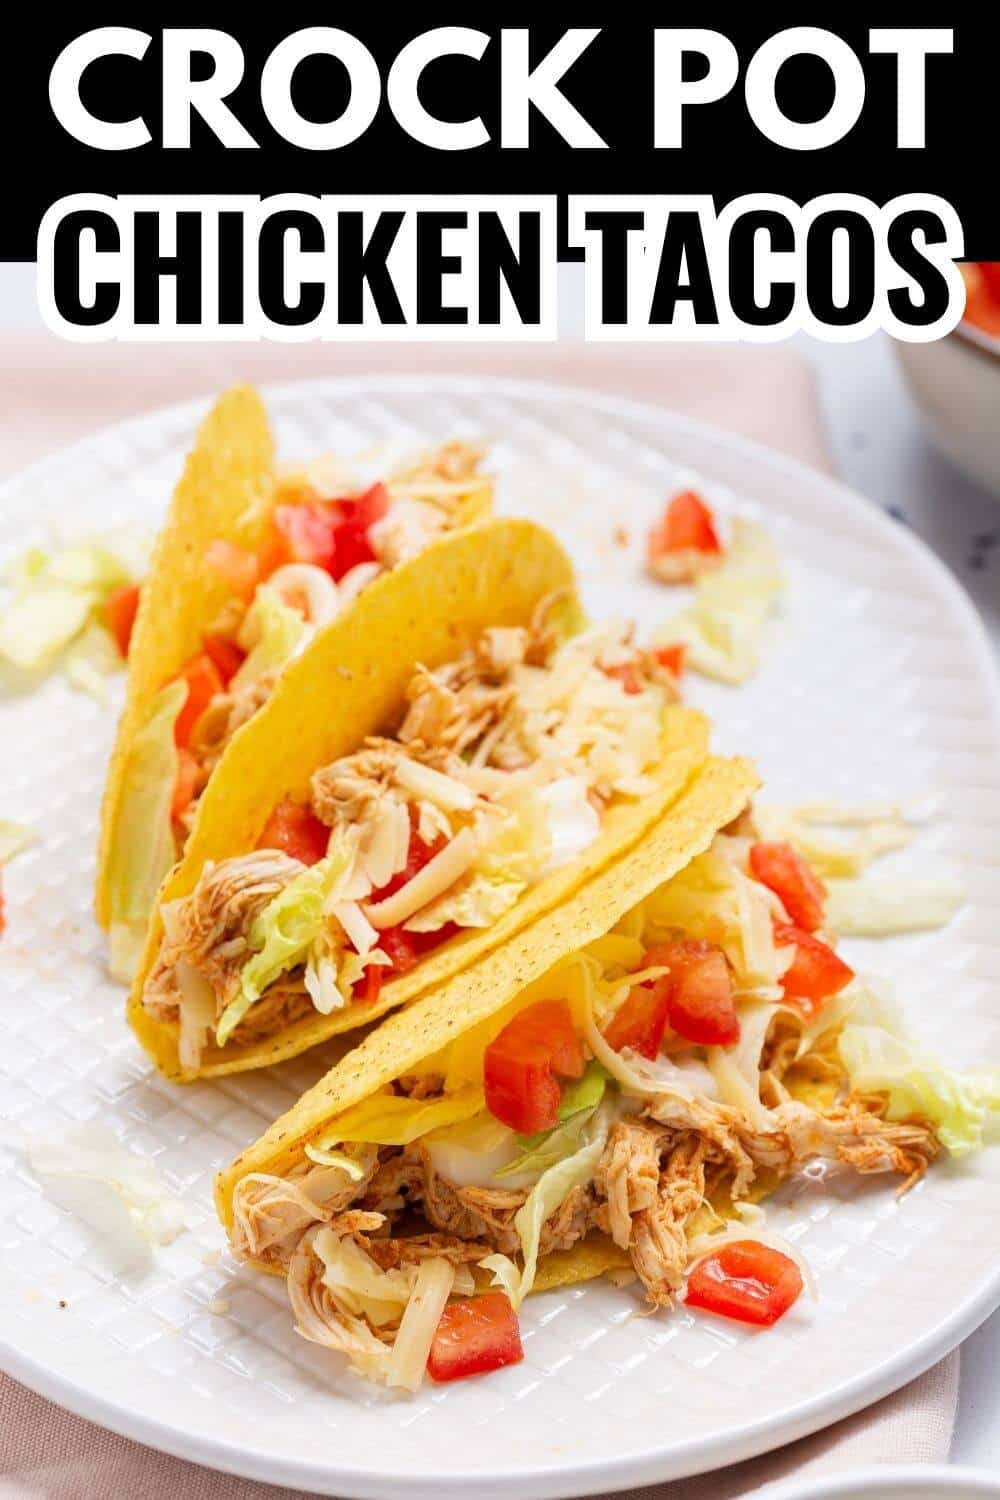 Crock pot chicken tacos on a white plate.